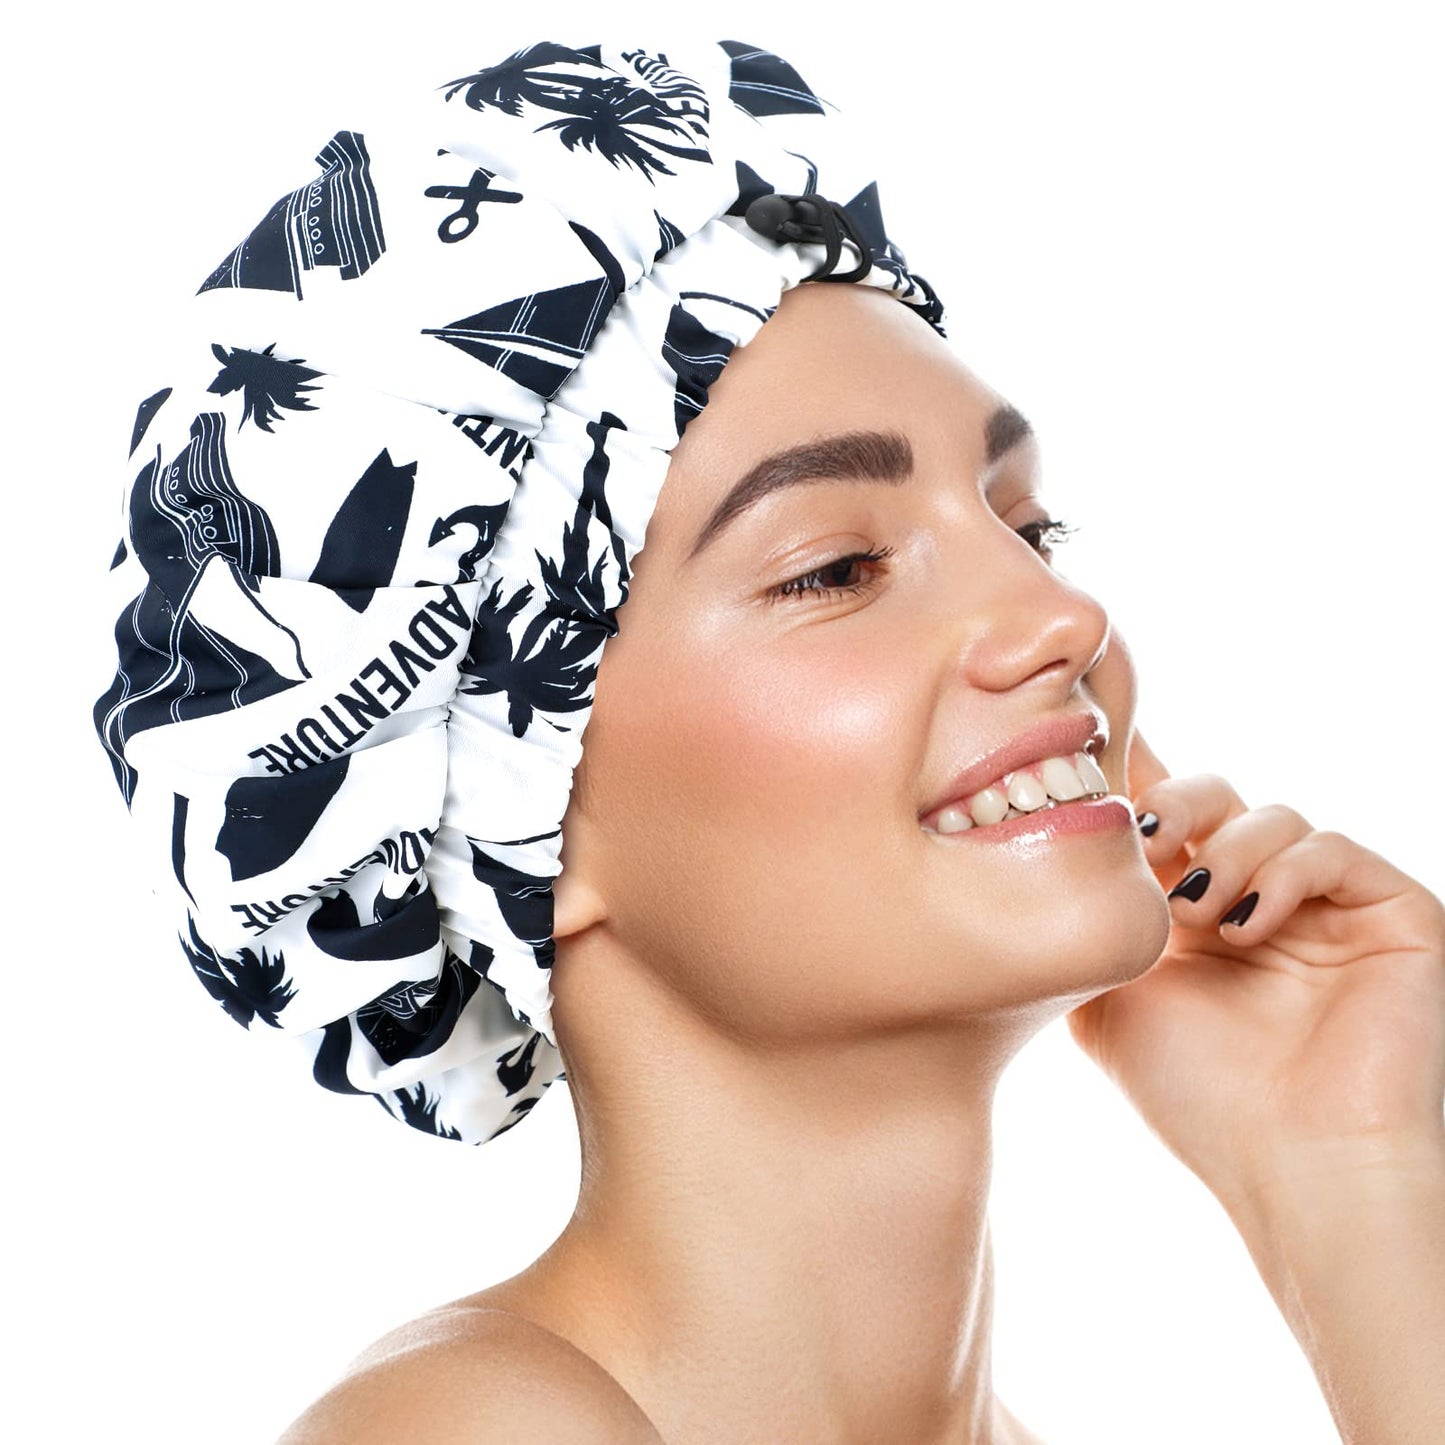 POZILAN Luxury Shower Cap for Women, Waterproof Reusable Shower Caps Double Layers Soft Silk Satin Lined, Extra Large for Long Hair, Adjustable for Most Heads Size